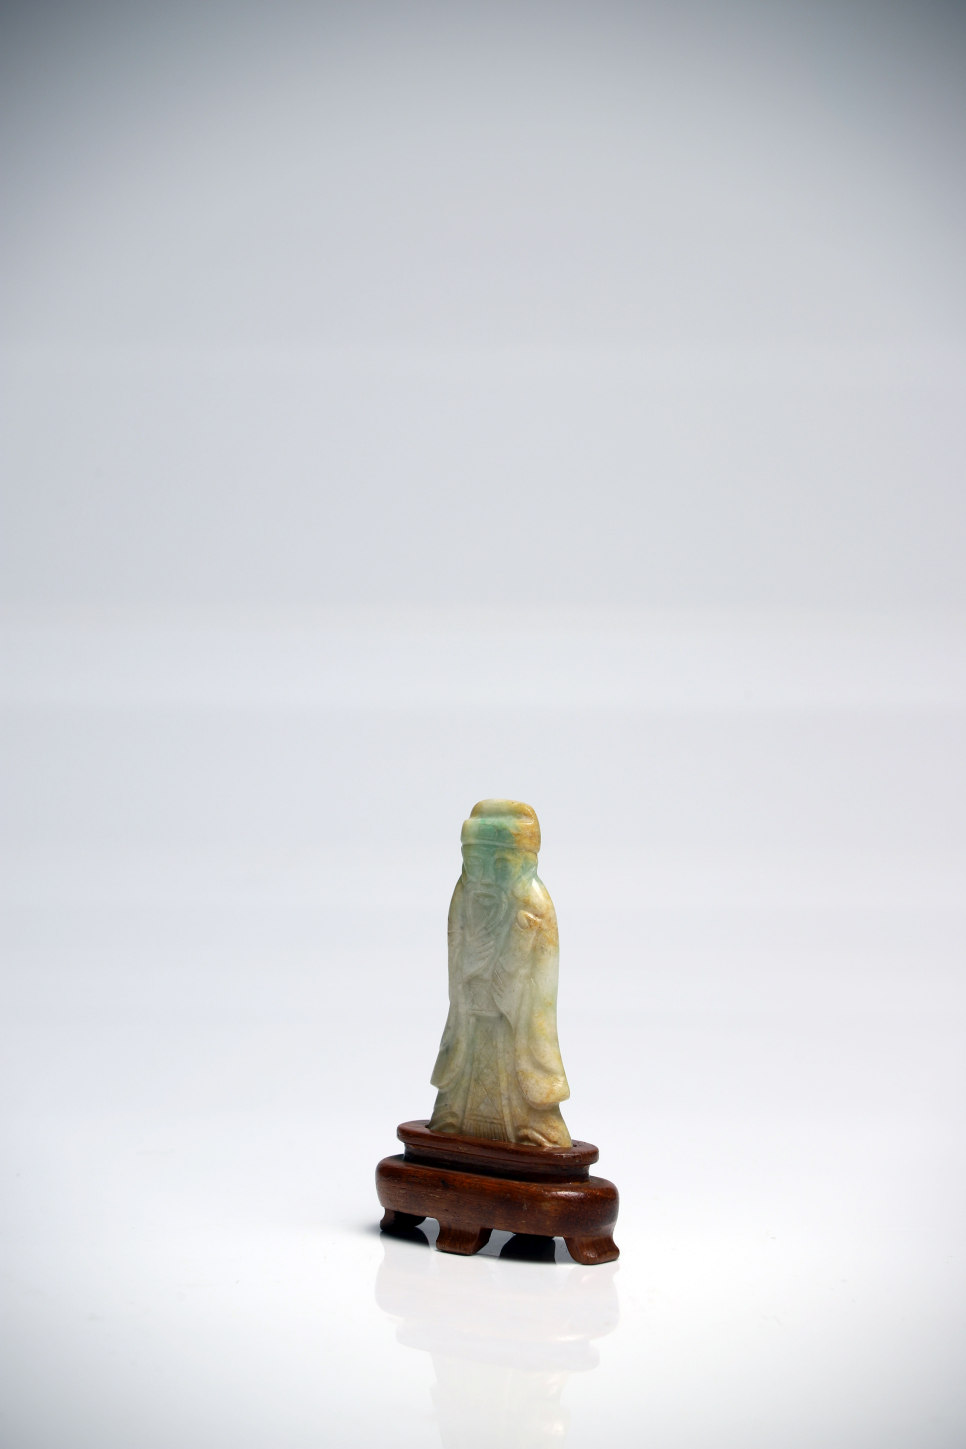 Chinese ScholarChinaJadeChina20th ctH: 6 cmA flat figurine of a Chinese scholar placed in a wooden - Image 3 of 5